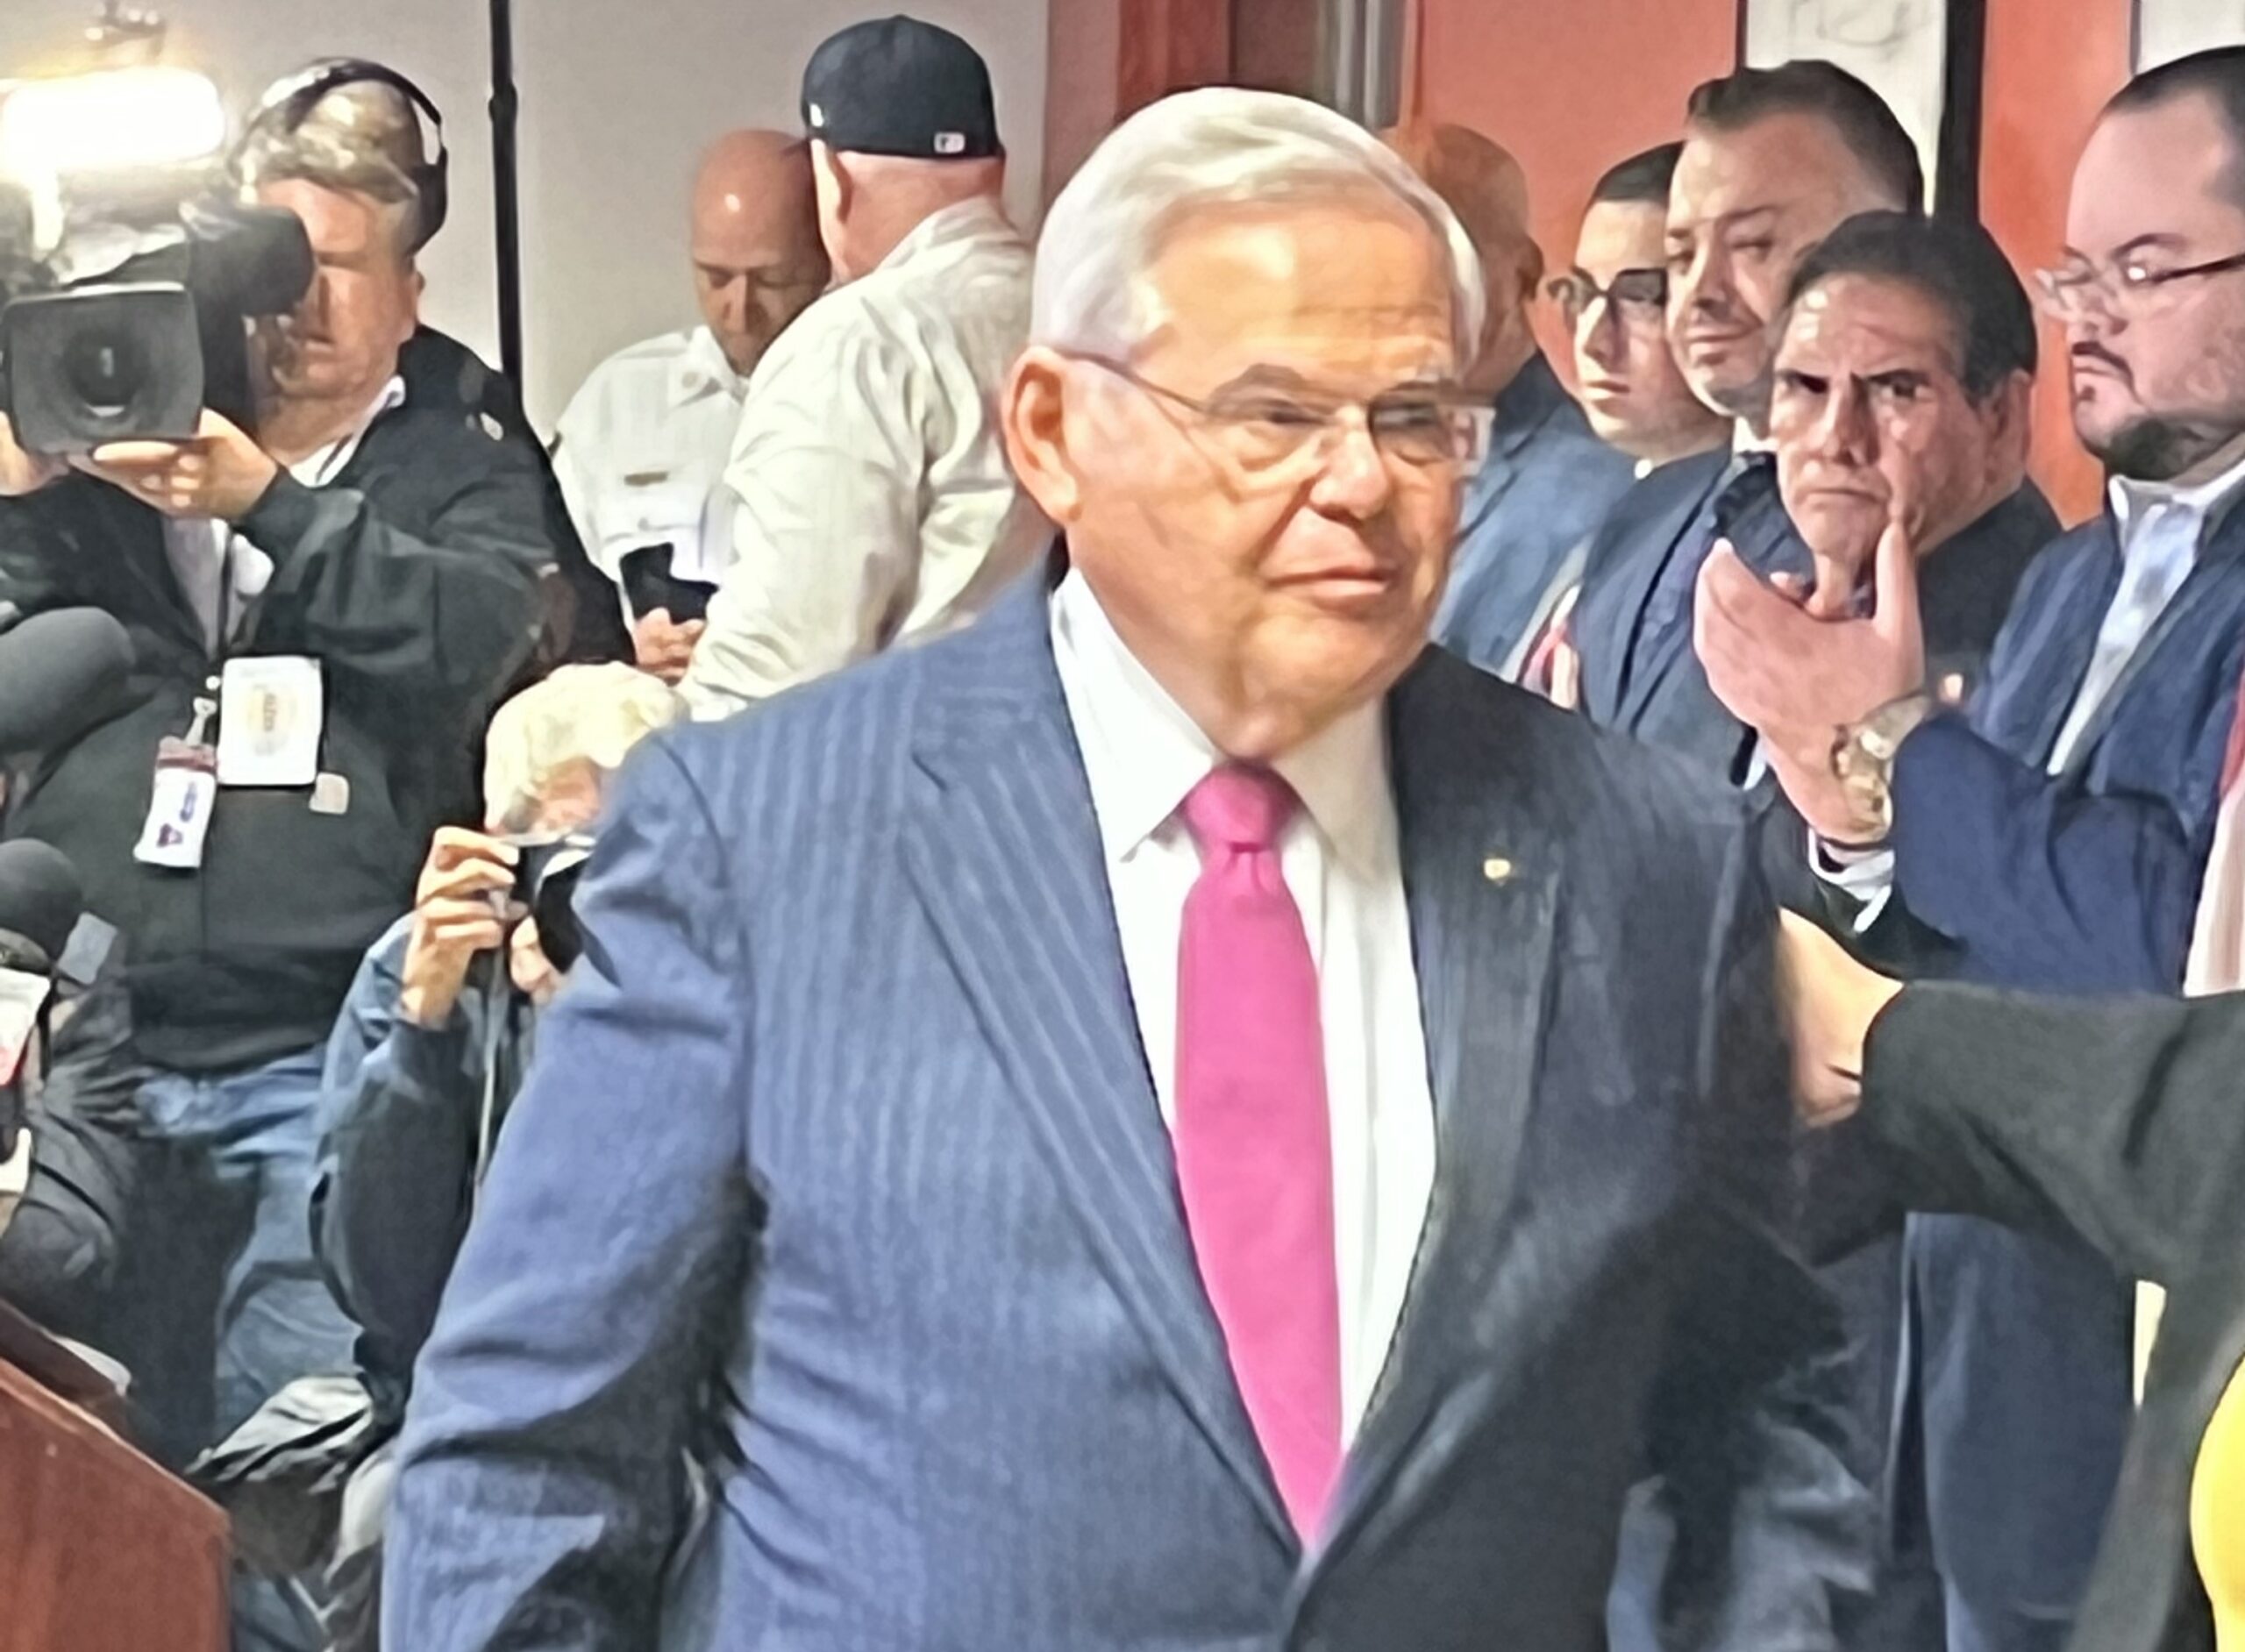 Republicans React to Menendez's Potential Independent Candidacy - Insider NJ